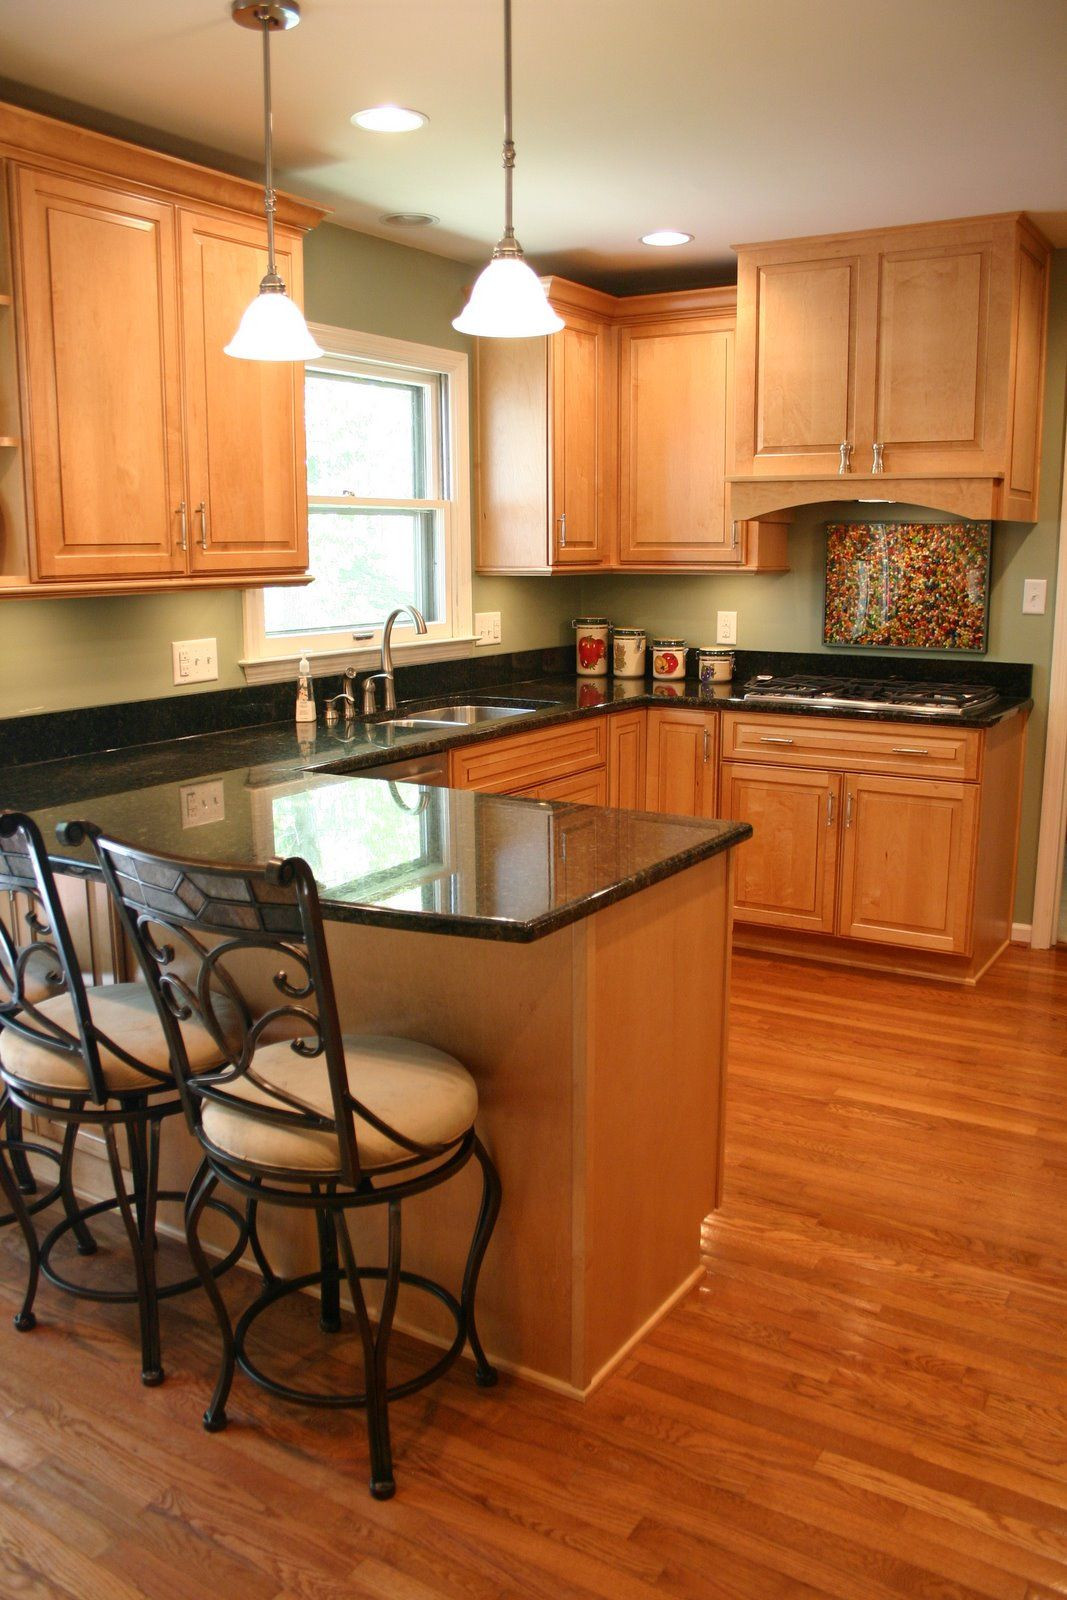 Color For Kitchen Walls
 Rustic Vinyl Floor Coloring That Goes With Golden Oak Wood